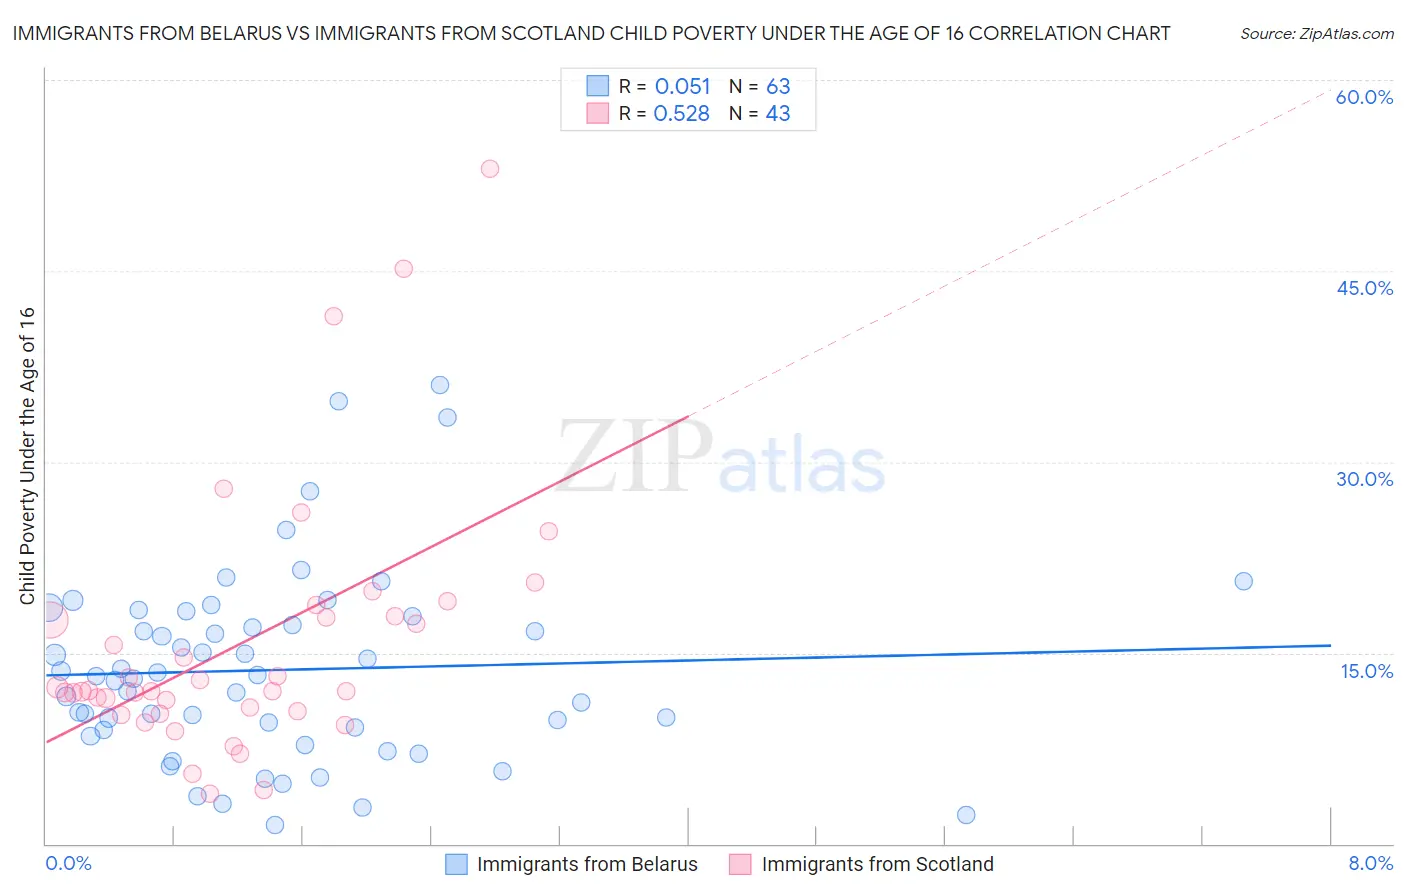 Immigrants from Belarus vs Immigrants from Scotland Child Poverty Under the Age of 16